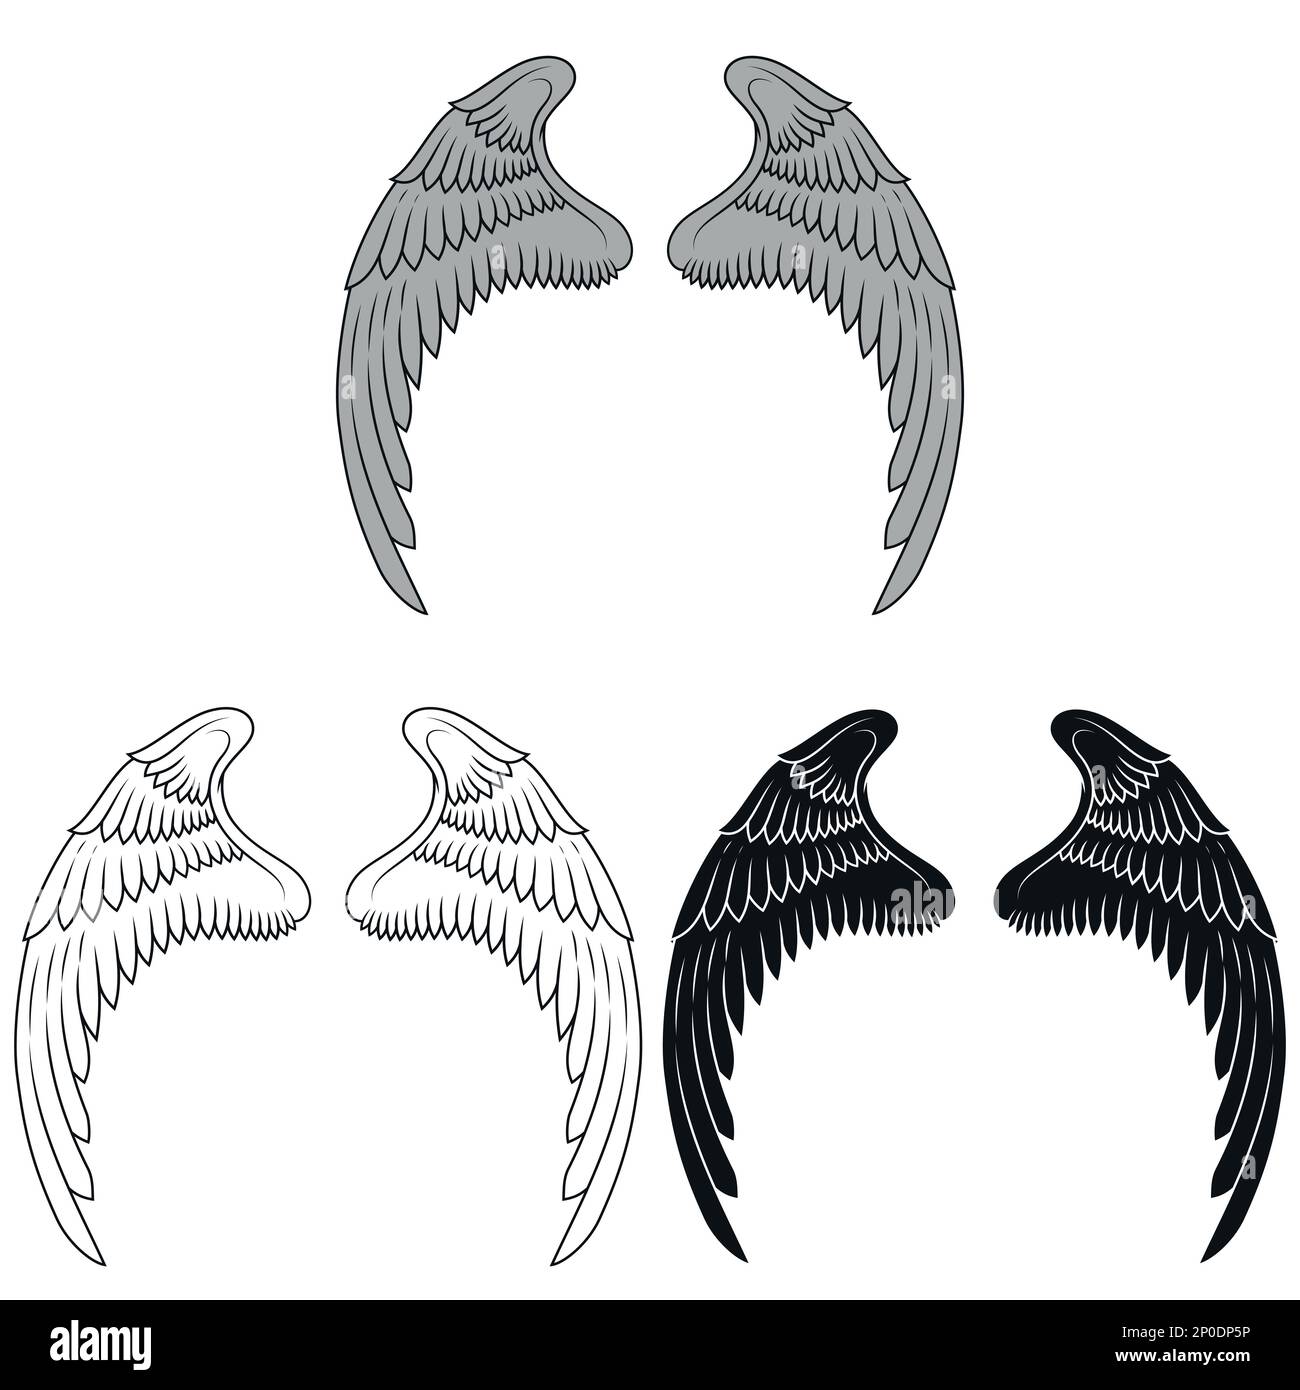 Vector design of angel wings, bird wings for decoration Stock Vector